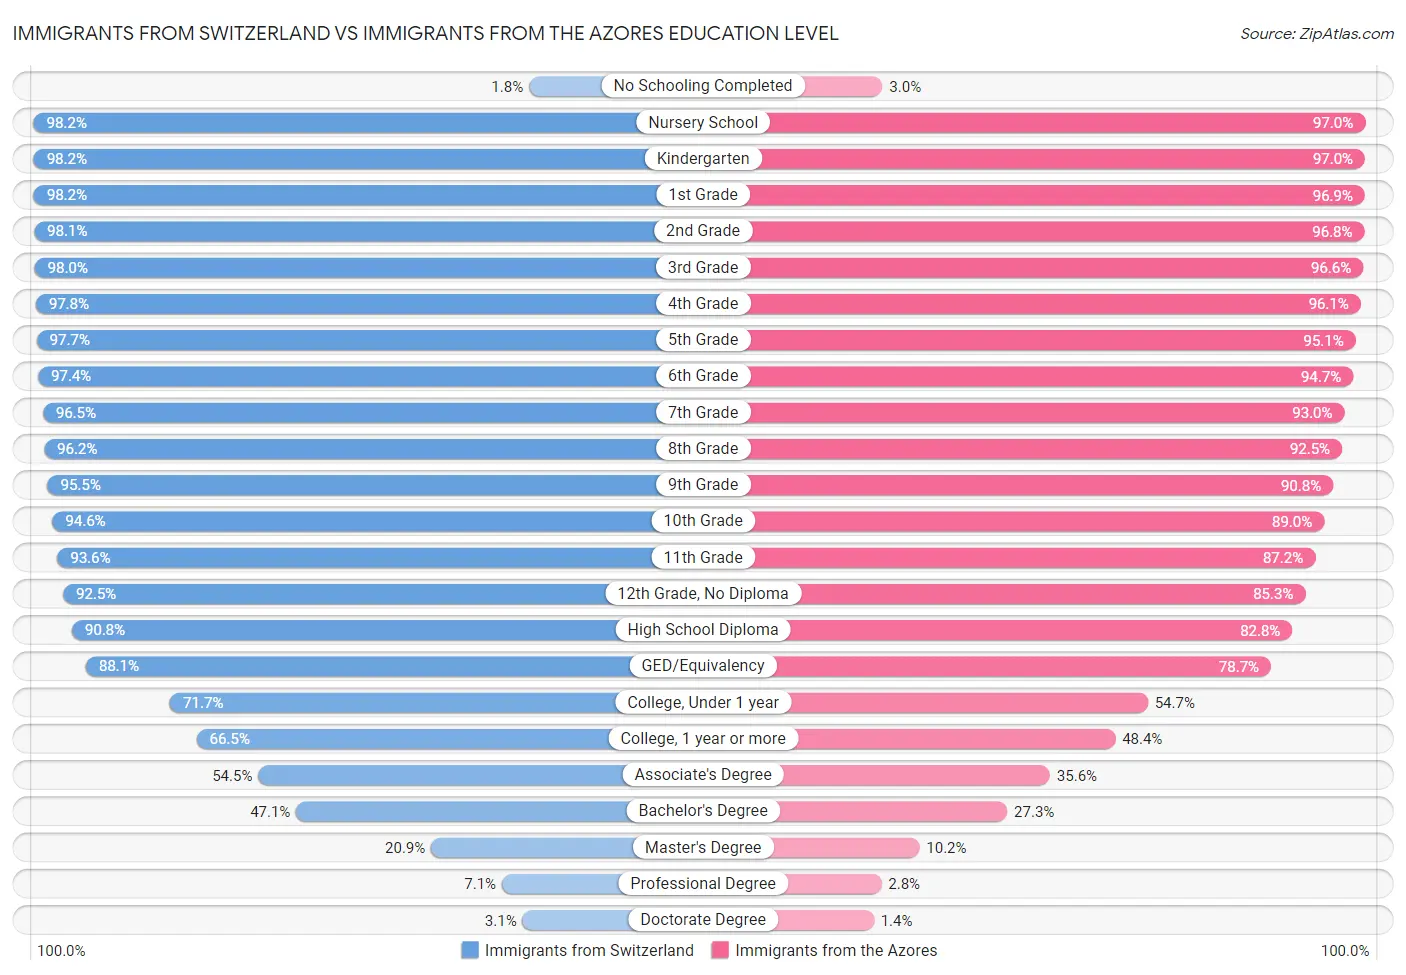 Immigrants from Switzerland vs Immigrants from the Azores Education Level